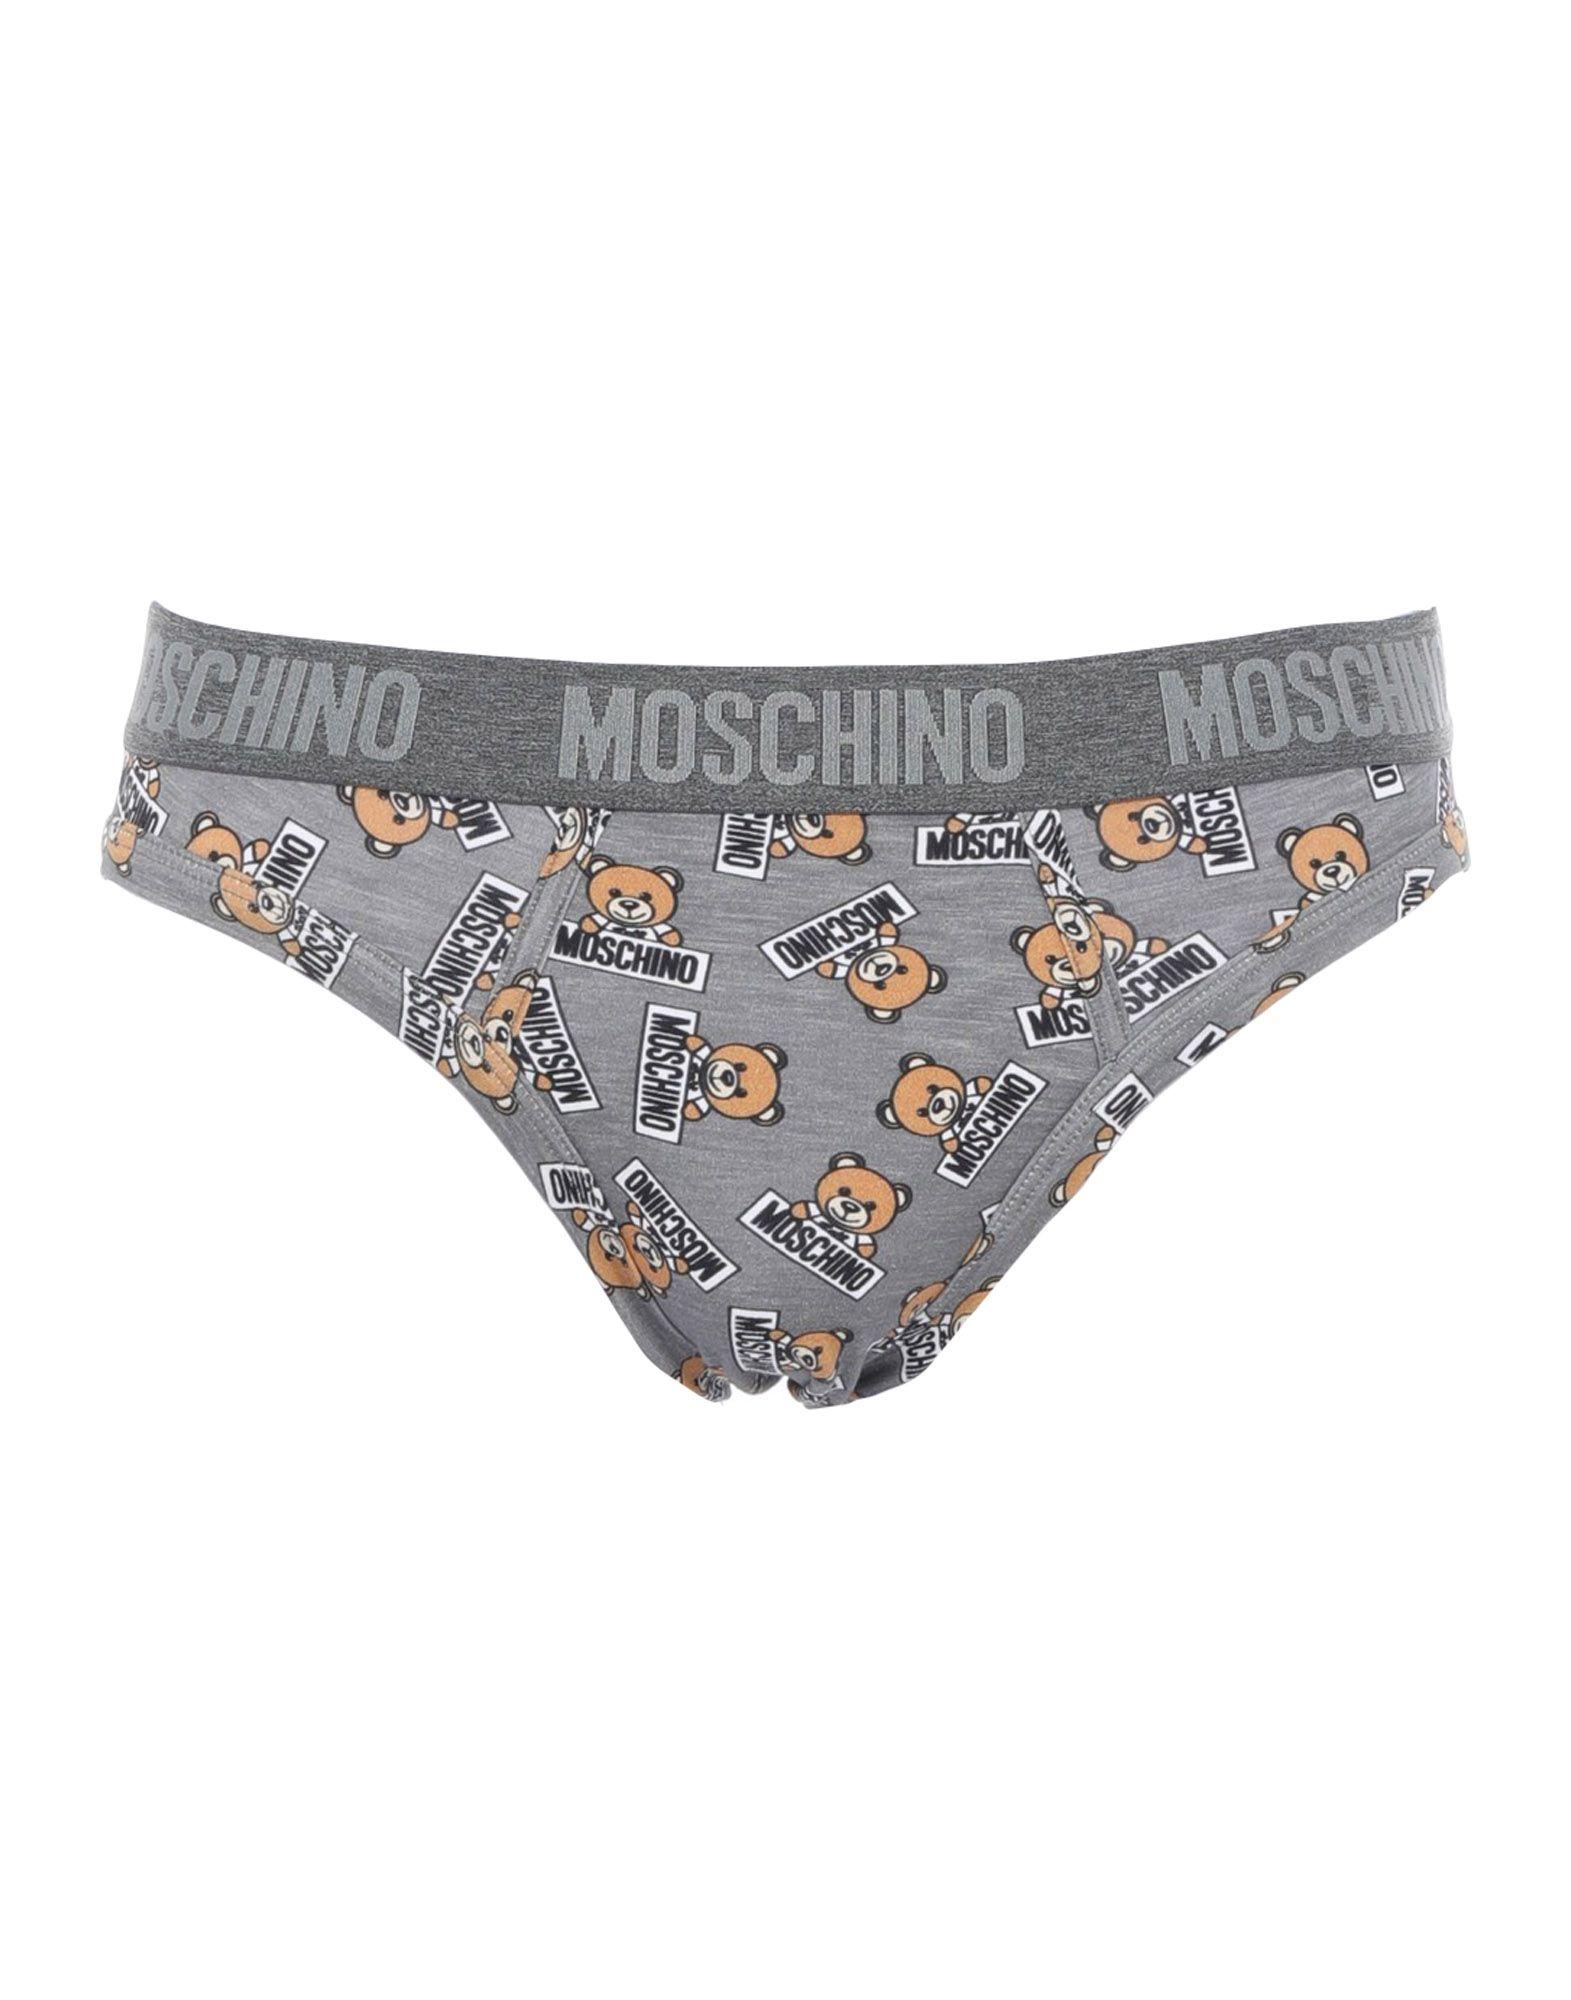 Moschino Cotton Brief in Grey (Gray) for Men - Lyst